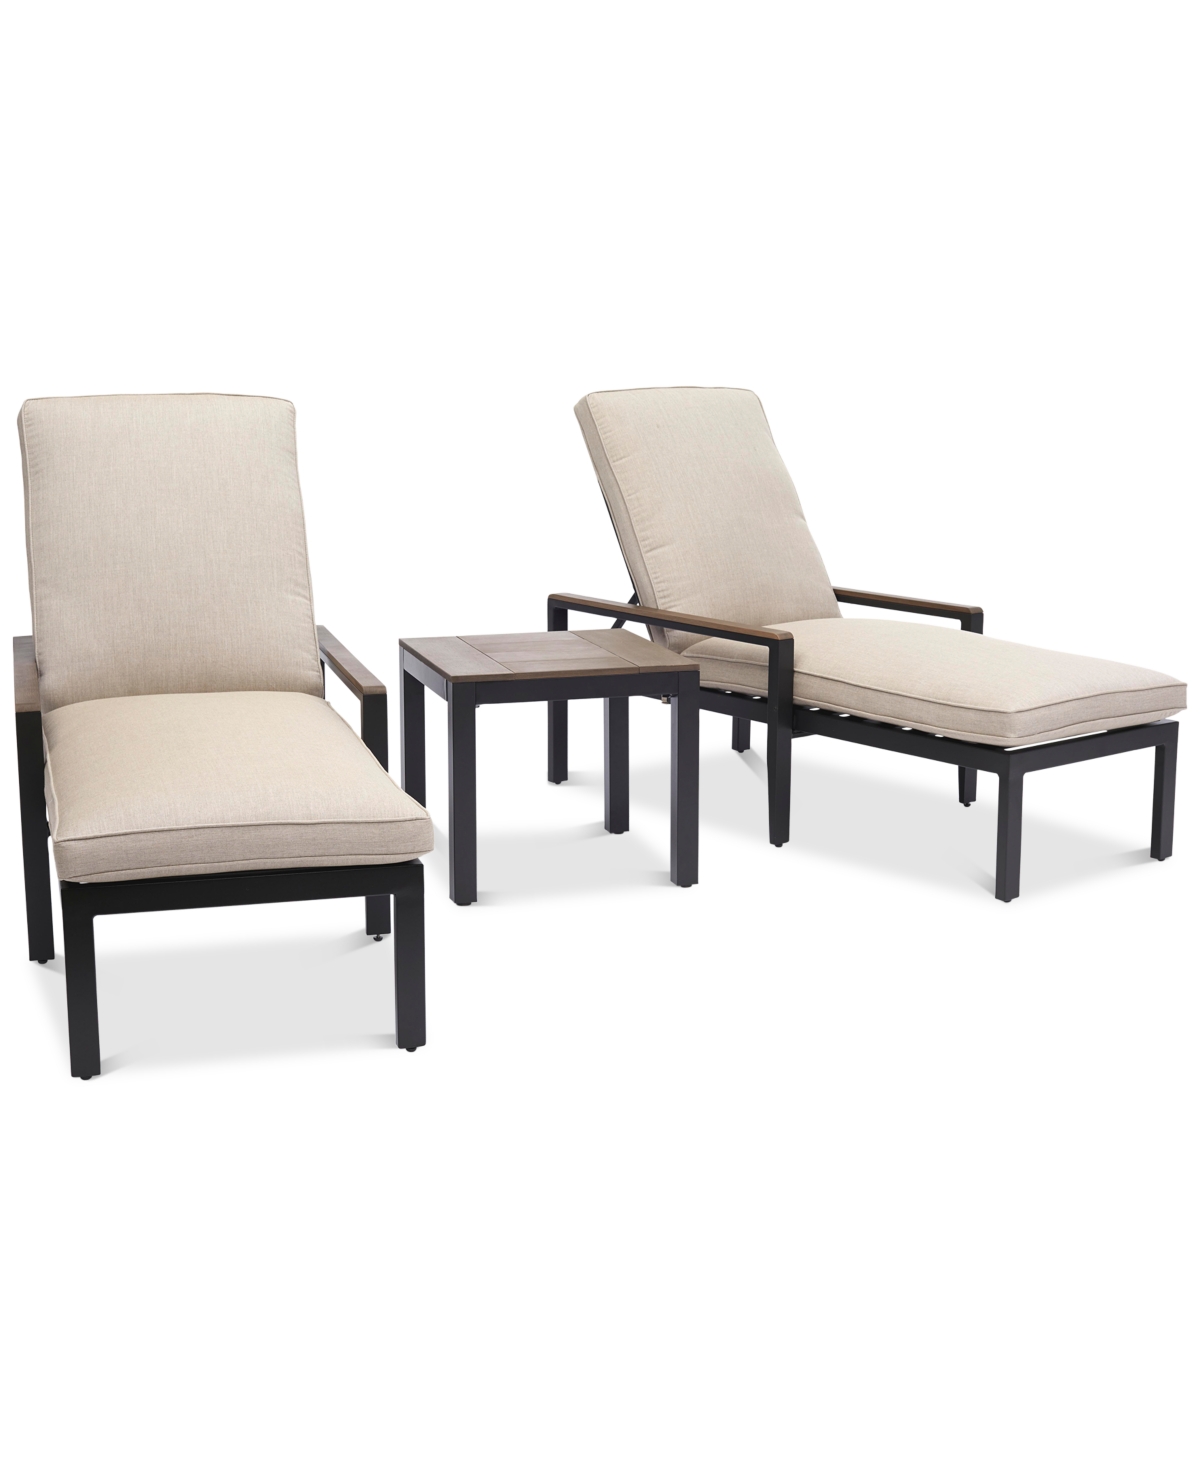 10397614 Stockholm Outdoor 3-Pc. Chaise Set (2 Chaise Loung sku 10397614